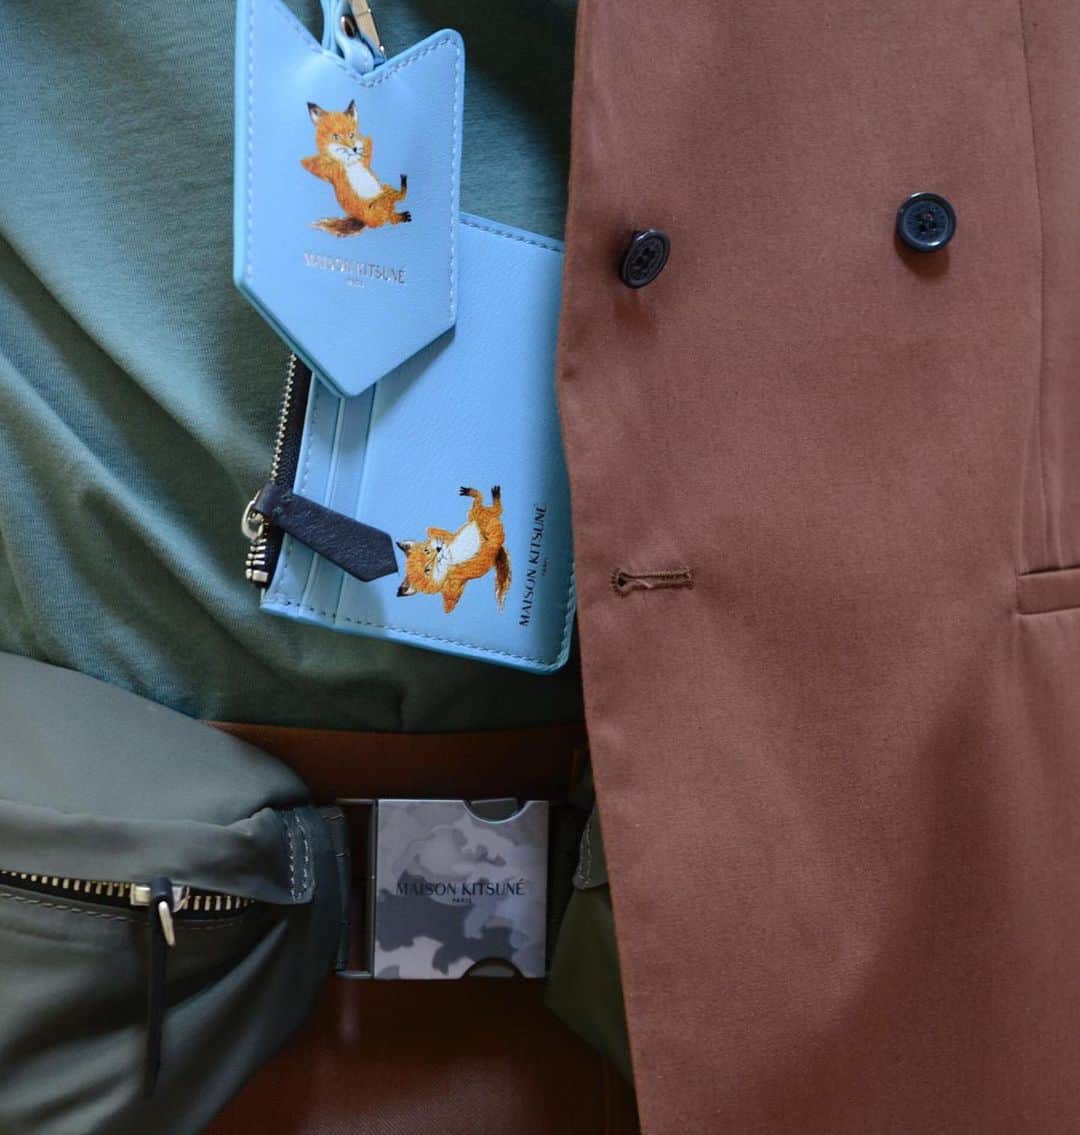 Gildas Loaëcのインスタグラム：「Maison Kitsuné’s Spring-Summer 2020 collection subtly blends sharp tailoring, distinct streetwear influences, playfulness and wearable, comfort-focused designs.  the ‘Chillax Fox’ zipped card and key holders - Head over our @kitsune IG Stories to discover more. - MAISON KITSUNÉ SPRING-SUMMER 2020  DESIGNED BY CREATIVE DIRECTOR YUNI AHN #SS20 #MaisonKitsune #PFW」